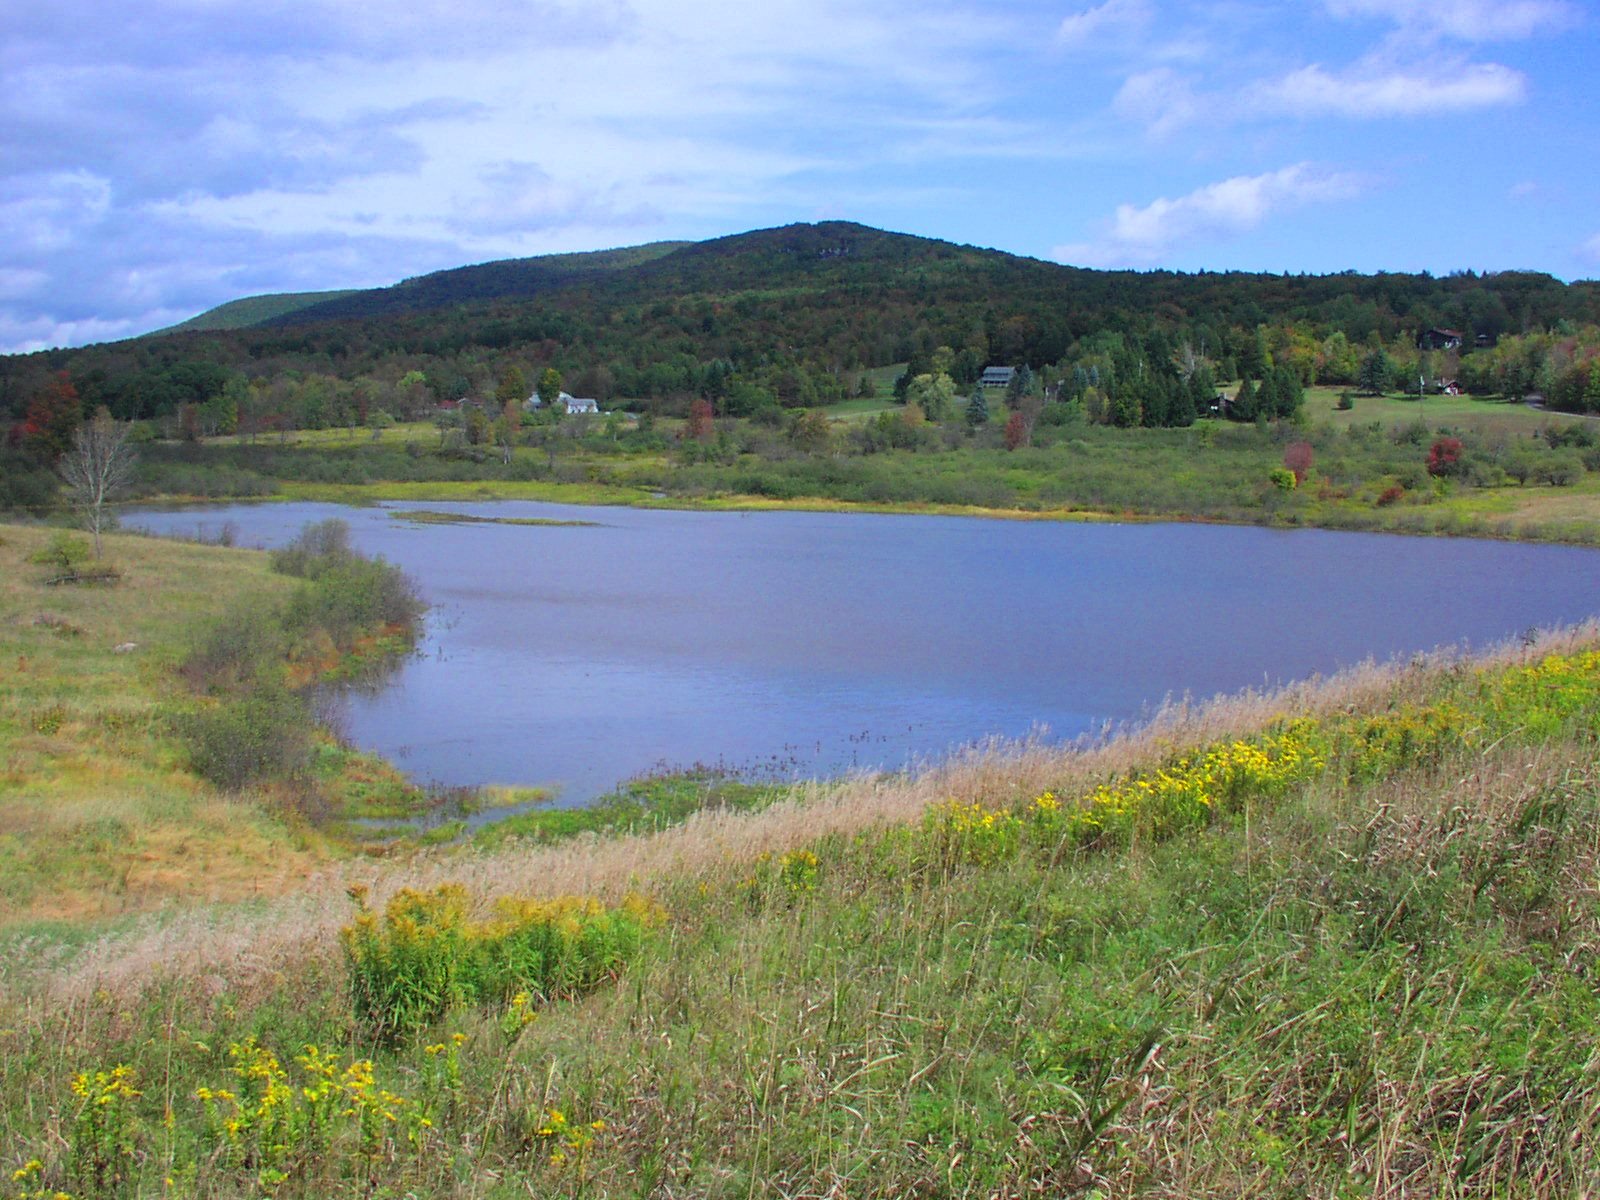 One of many floodwater control dams in New York State